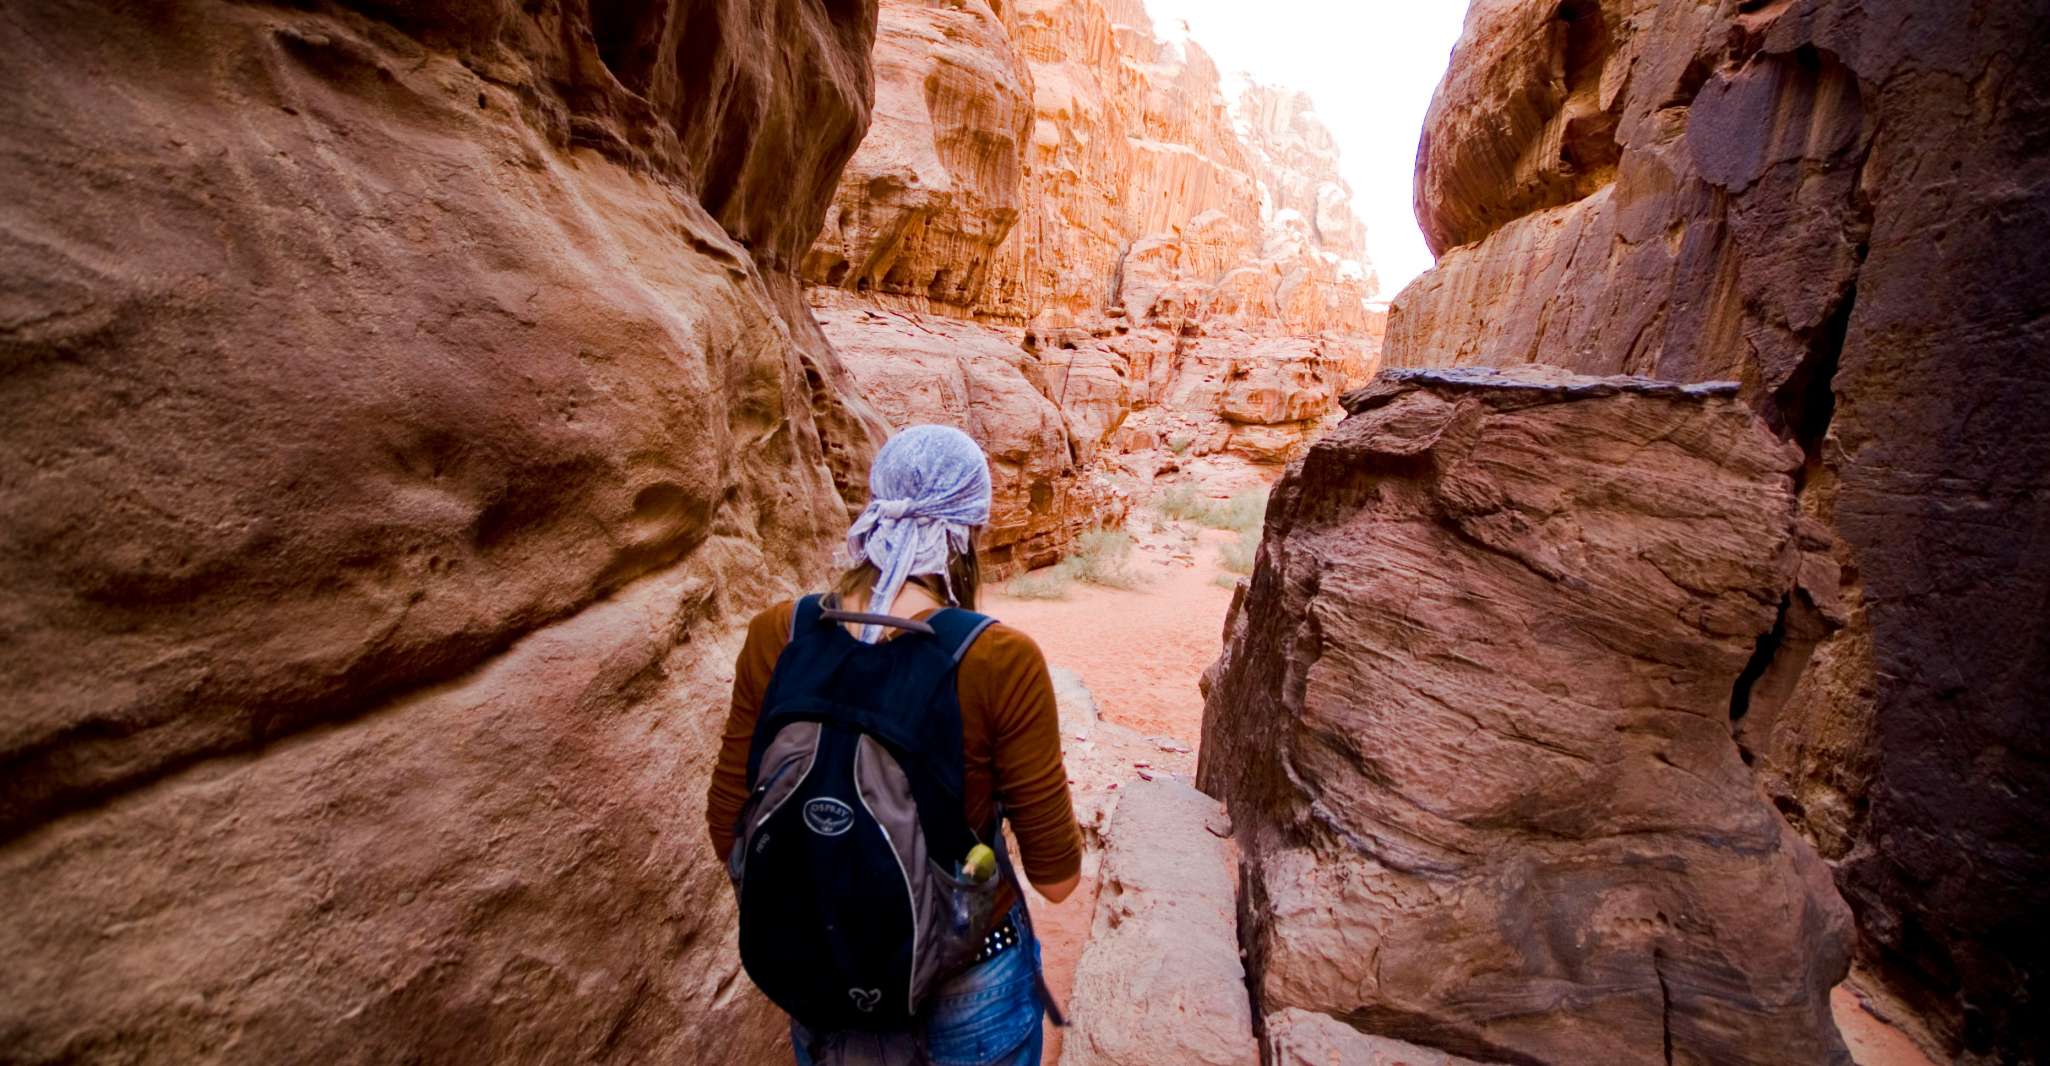 From Wadi Rum, 8 Hour Jeep Tour with Meal & One-Night Stay - Housity